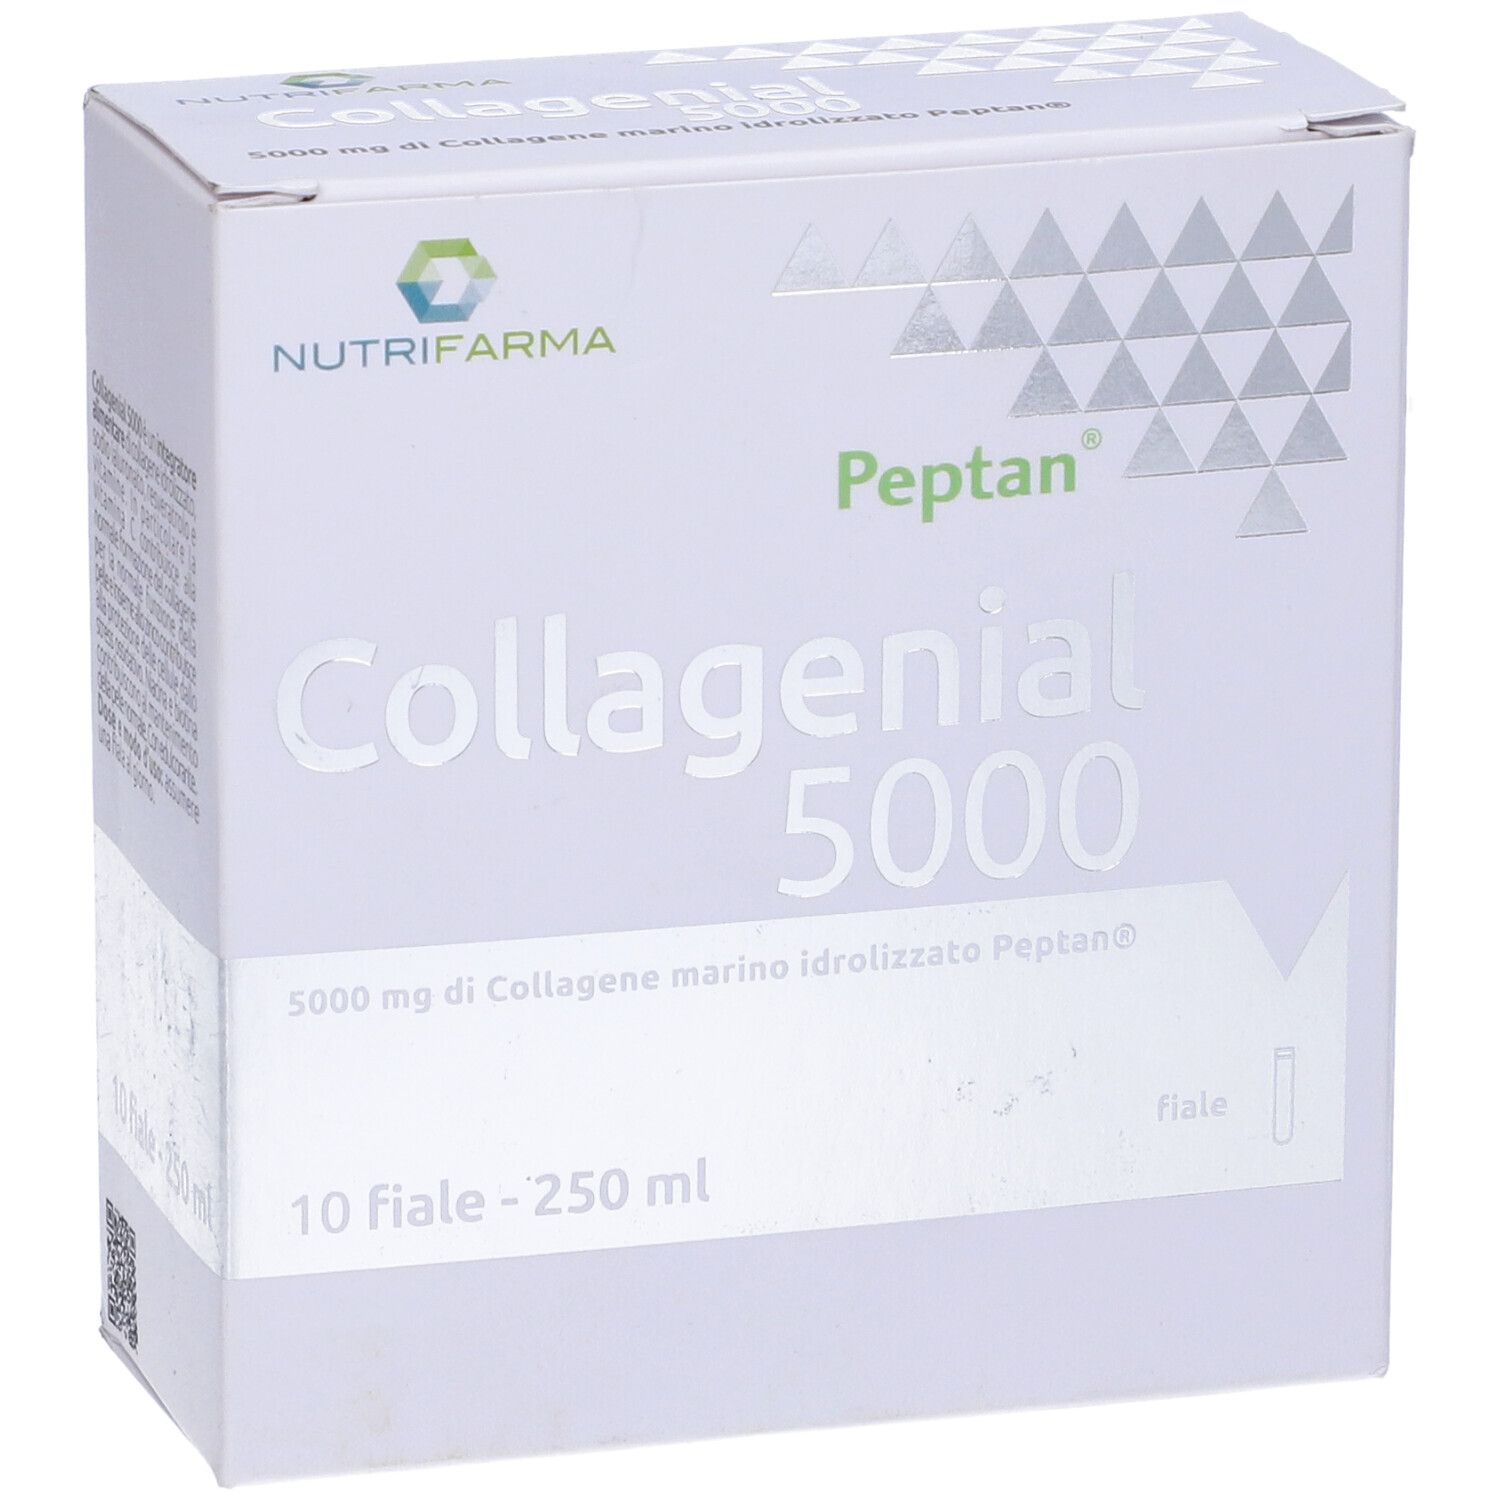 Collagenial 5000